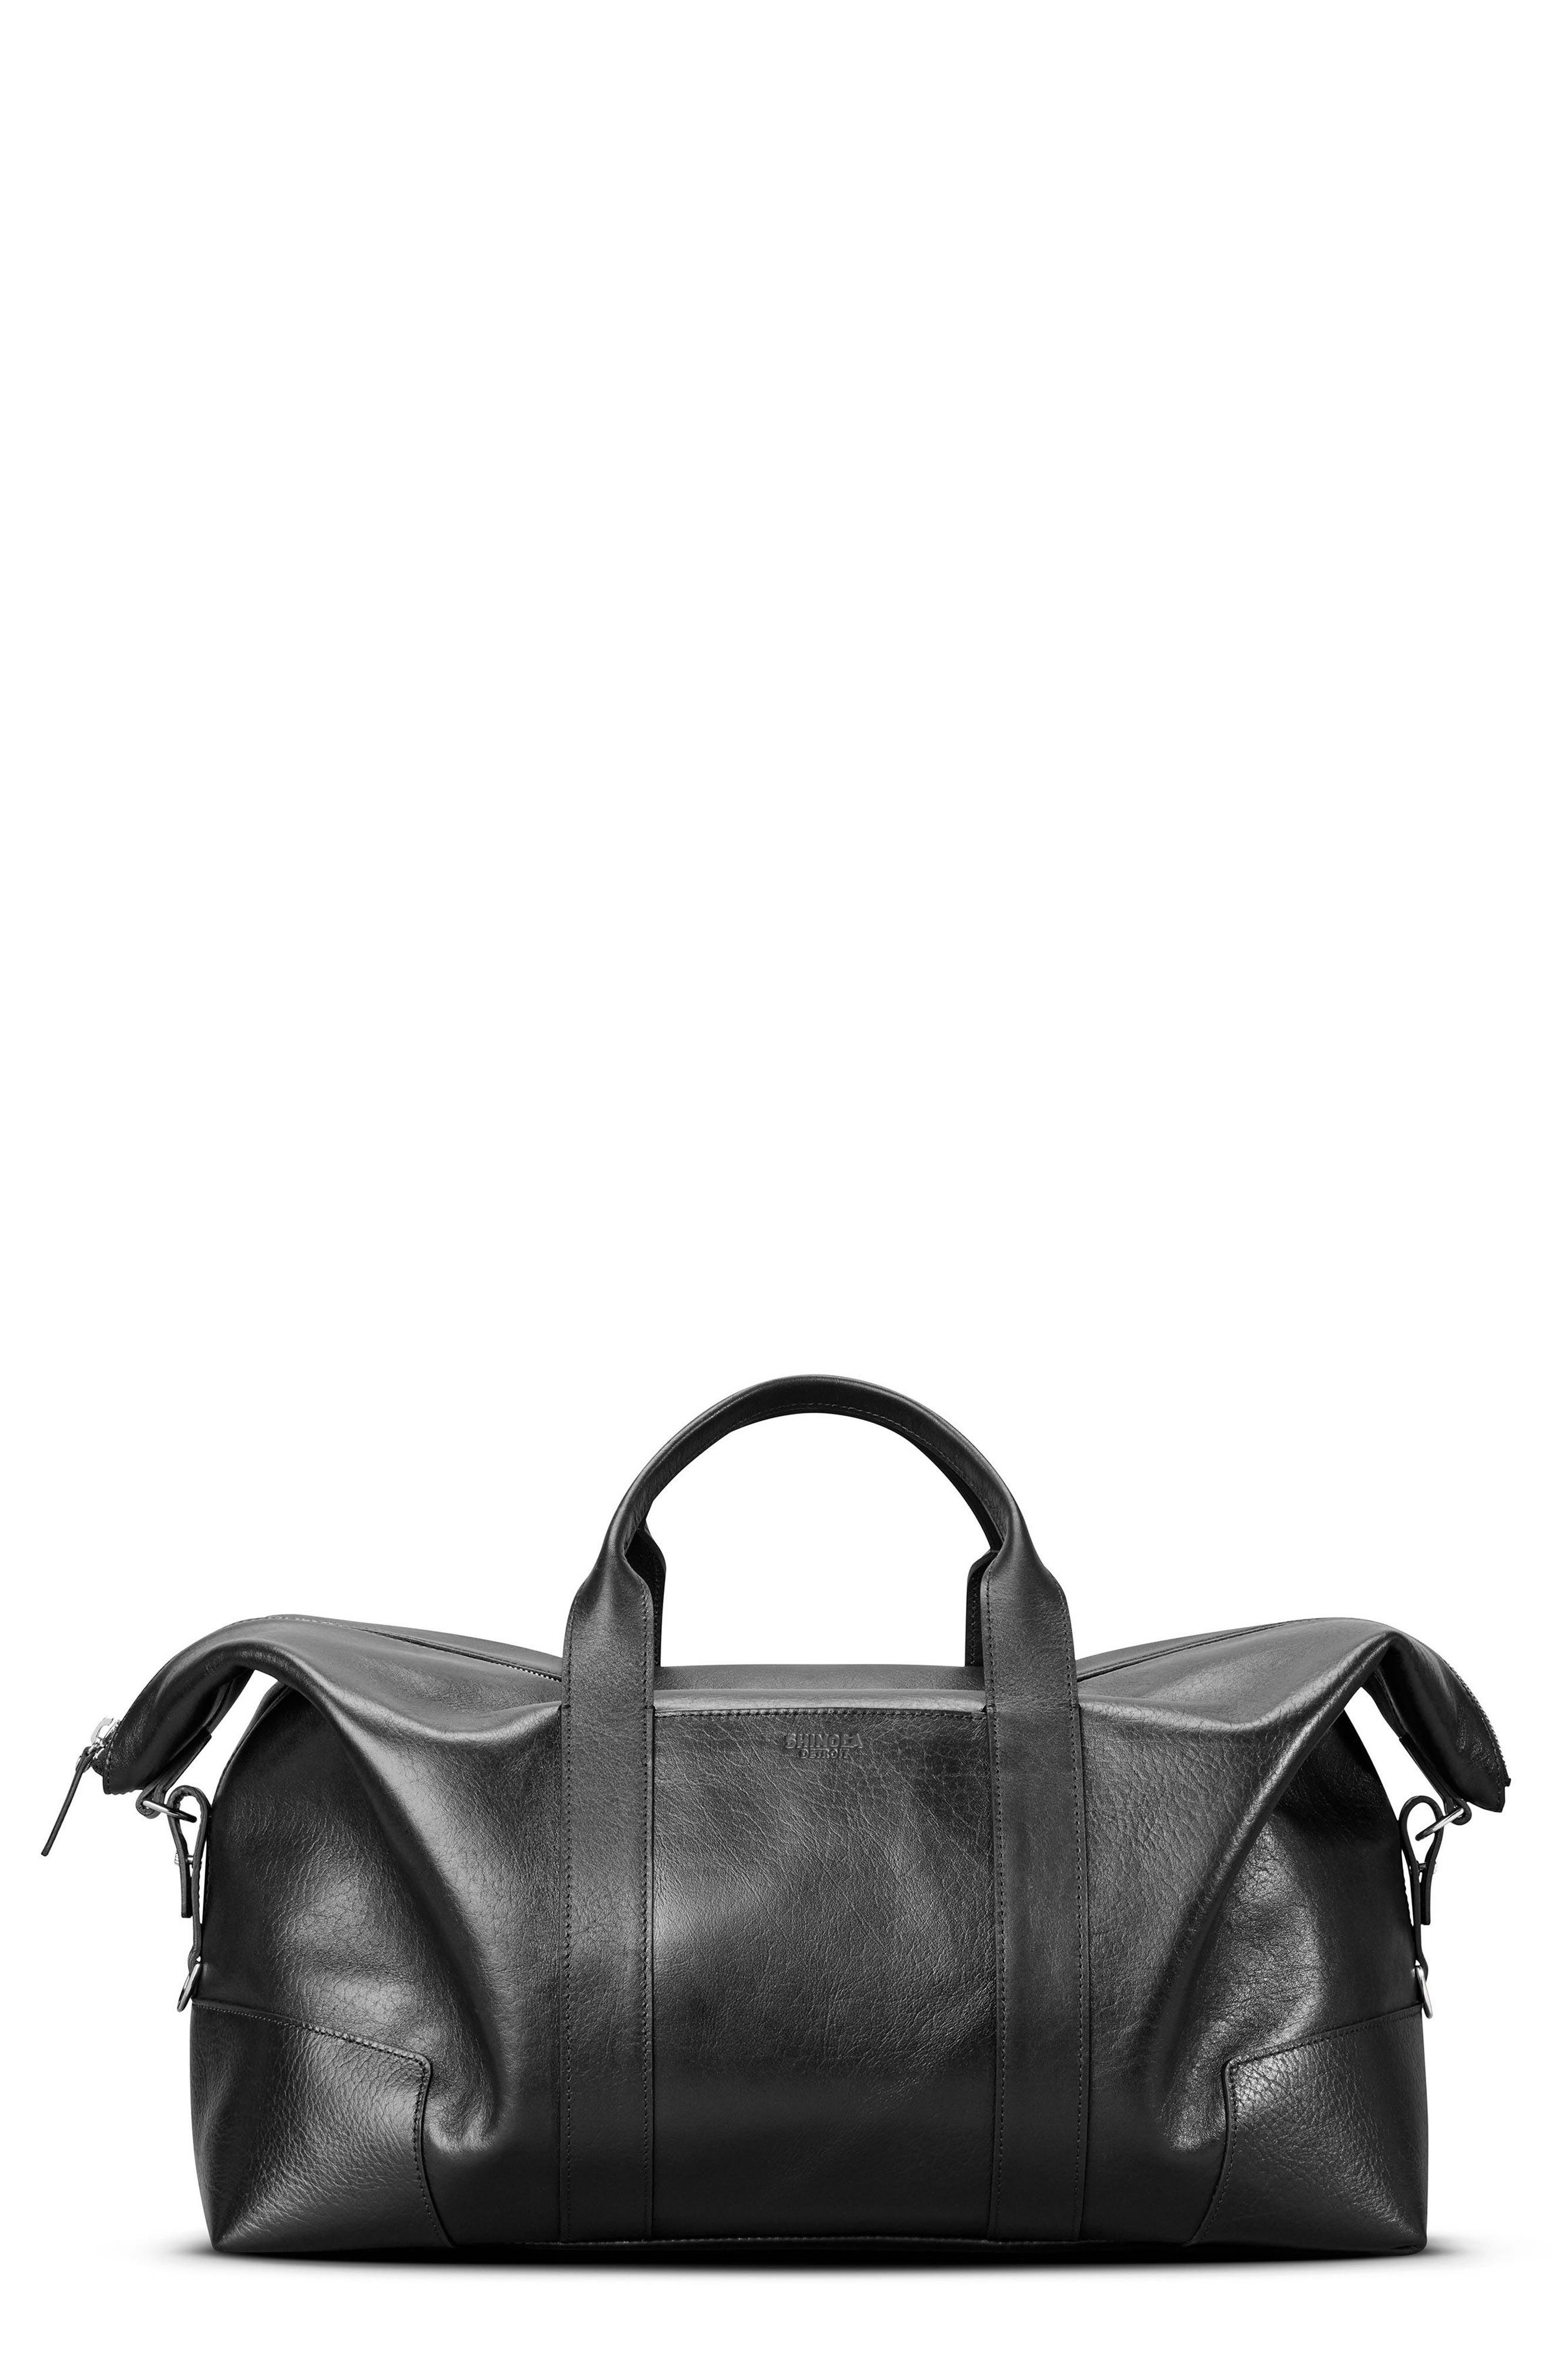 branded leather duffle bag